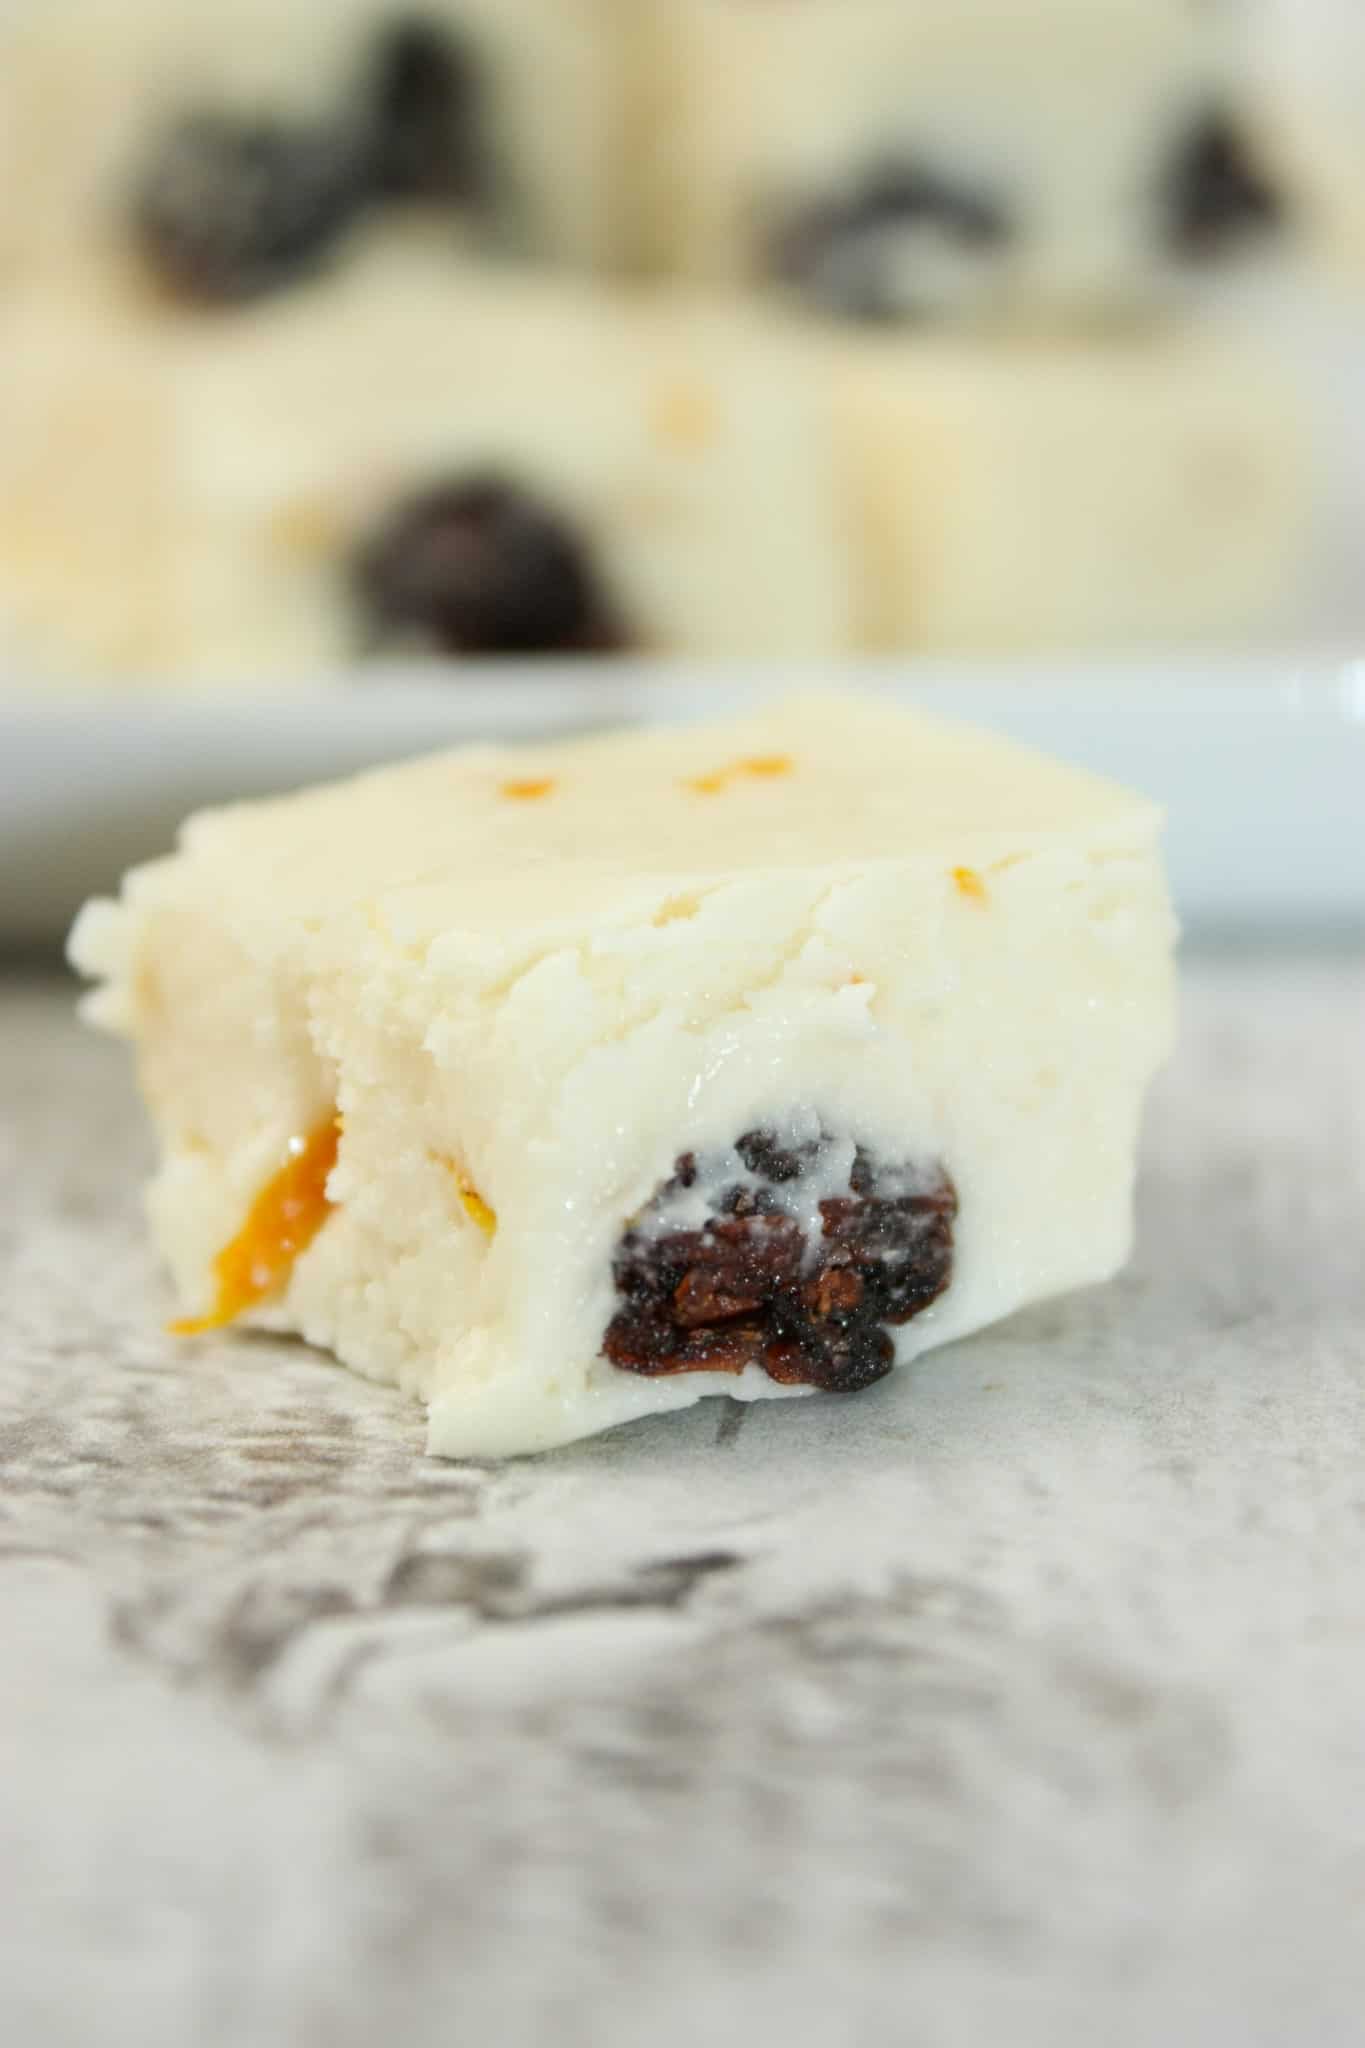 Cranberry Orange Fudge is a decadent treat.  This creamy, tasty candy is loaded with flavour and bits of dried cranberry.